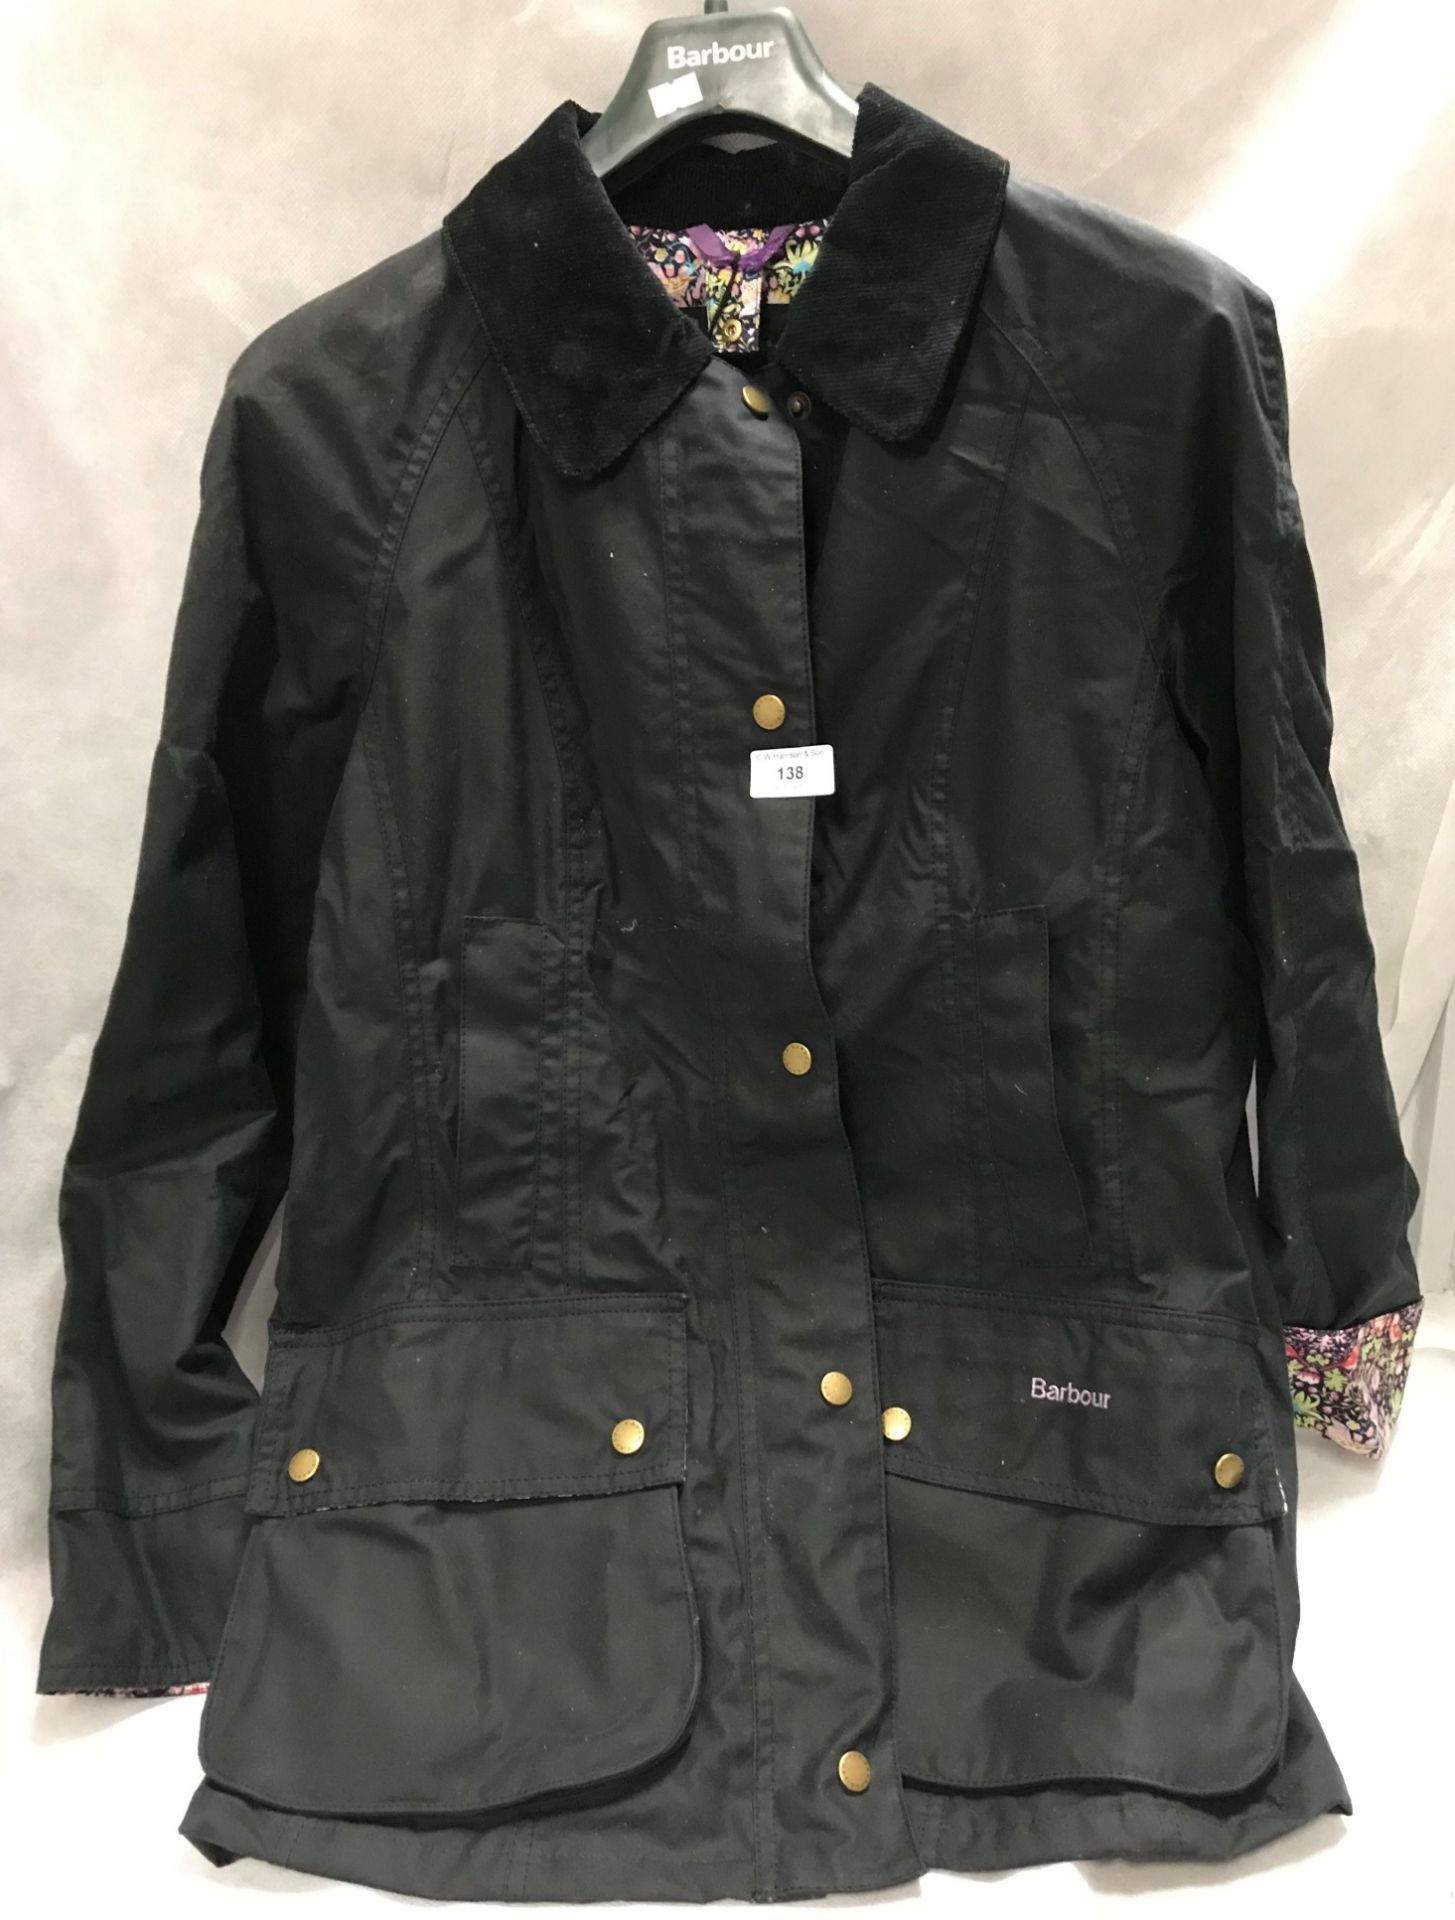 Ladies Liberty Beadnell Barbour wax coat RRP £220 size 12 (unpackaged,